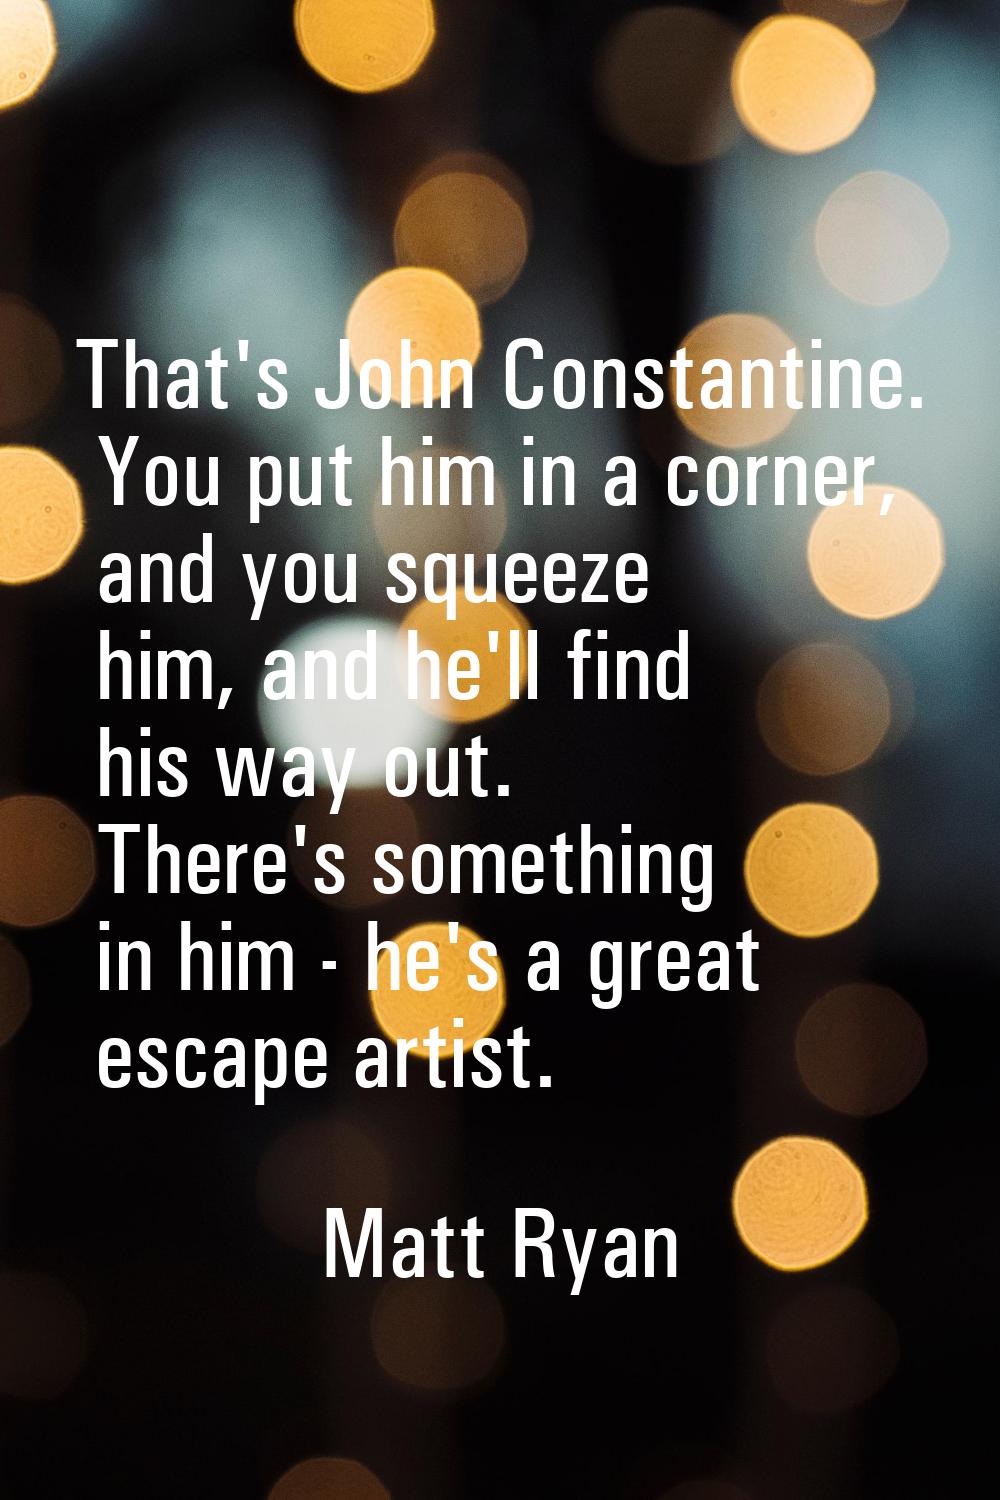 That's John Constantine. You put him in a corner, and you squeeze him, and he'll find his way out. 